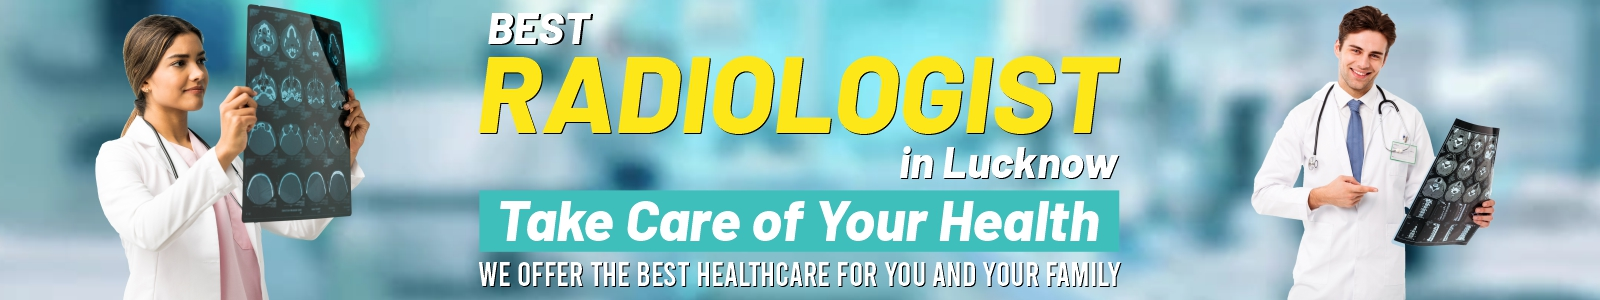 Best Radiologist in Lucknow
    